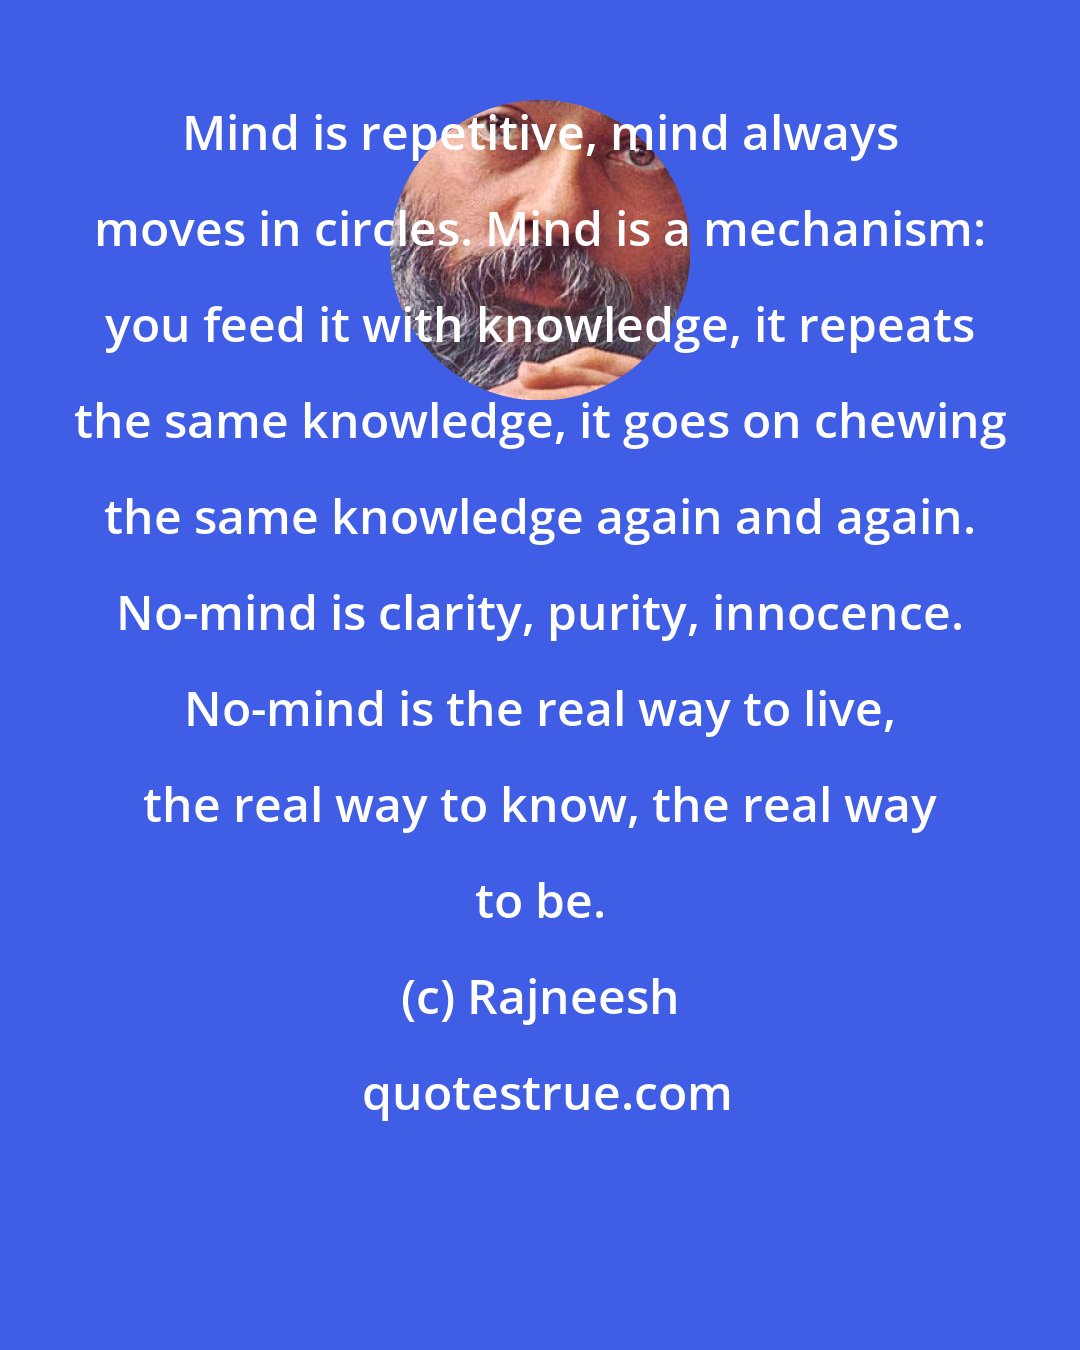 Rajneesh: Mind is repetitive, mind always moves in circles. Mind is a mechanism: you feed it with knowledge, it repeats the same knowledge, it goes on chewing the same knowledge again and again. No-mind is clarity, purity, innocence. No-mind is the real way to live, the real way to know, the real way to be.